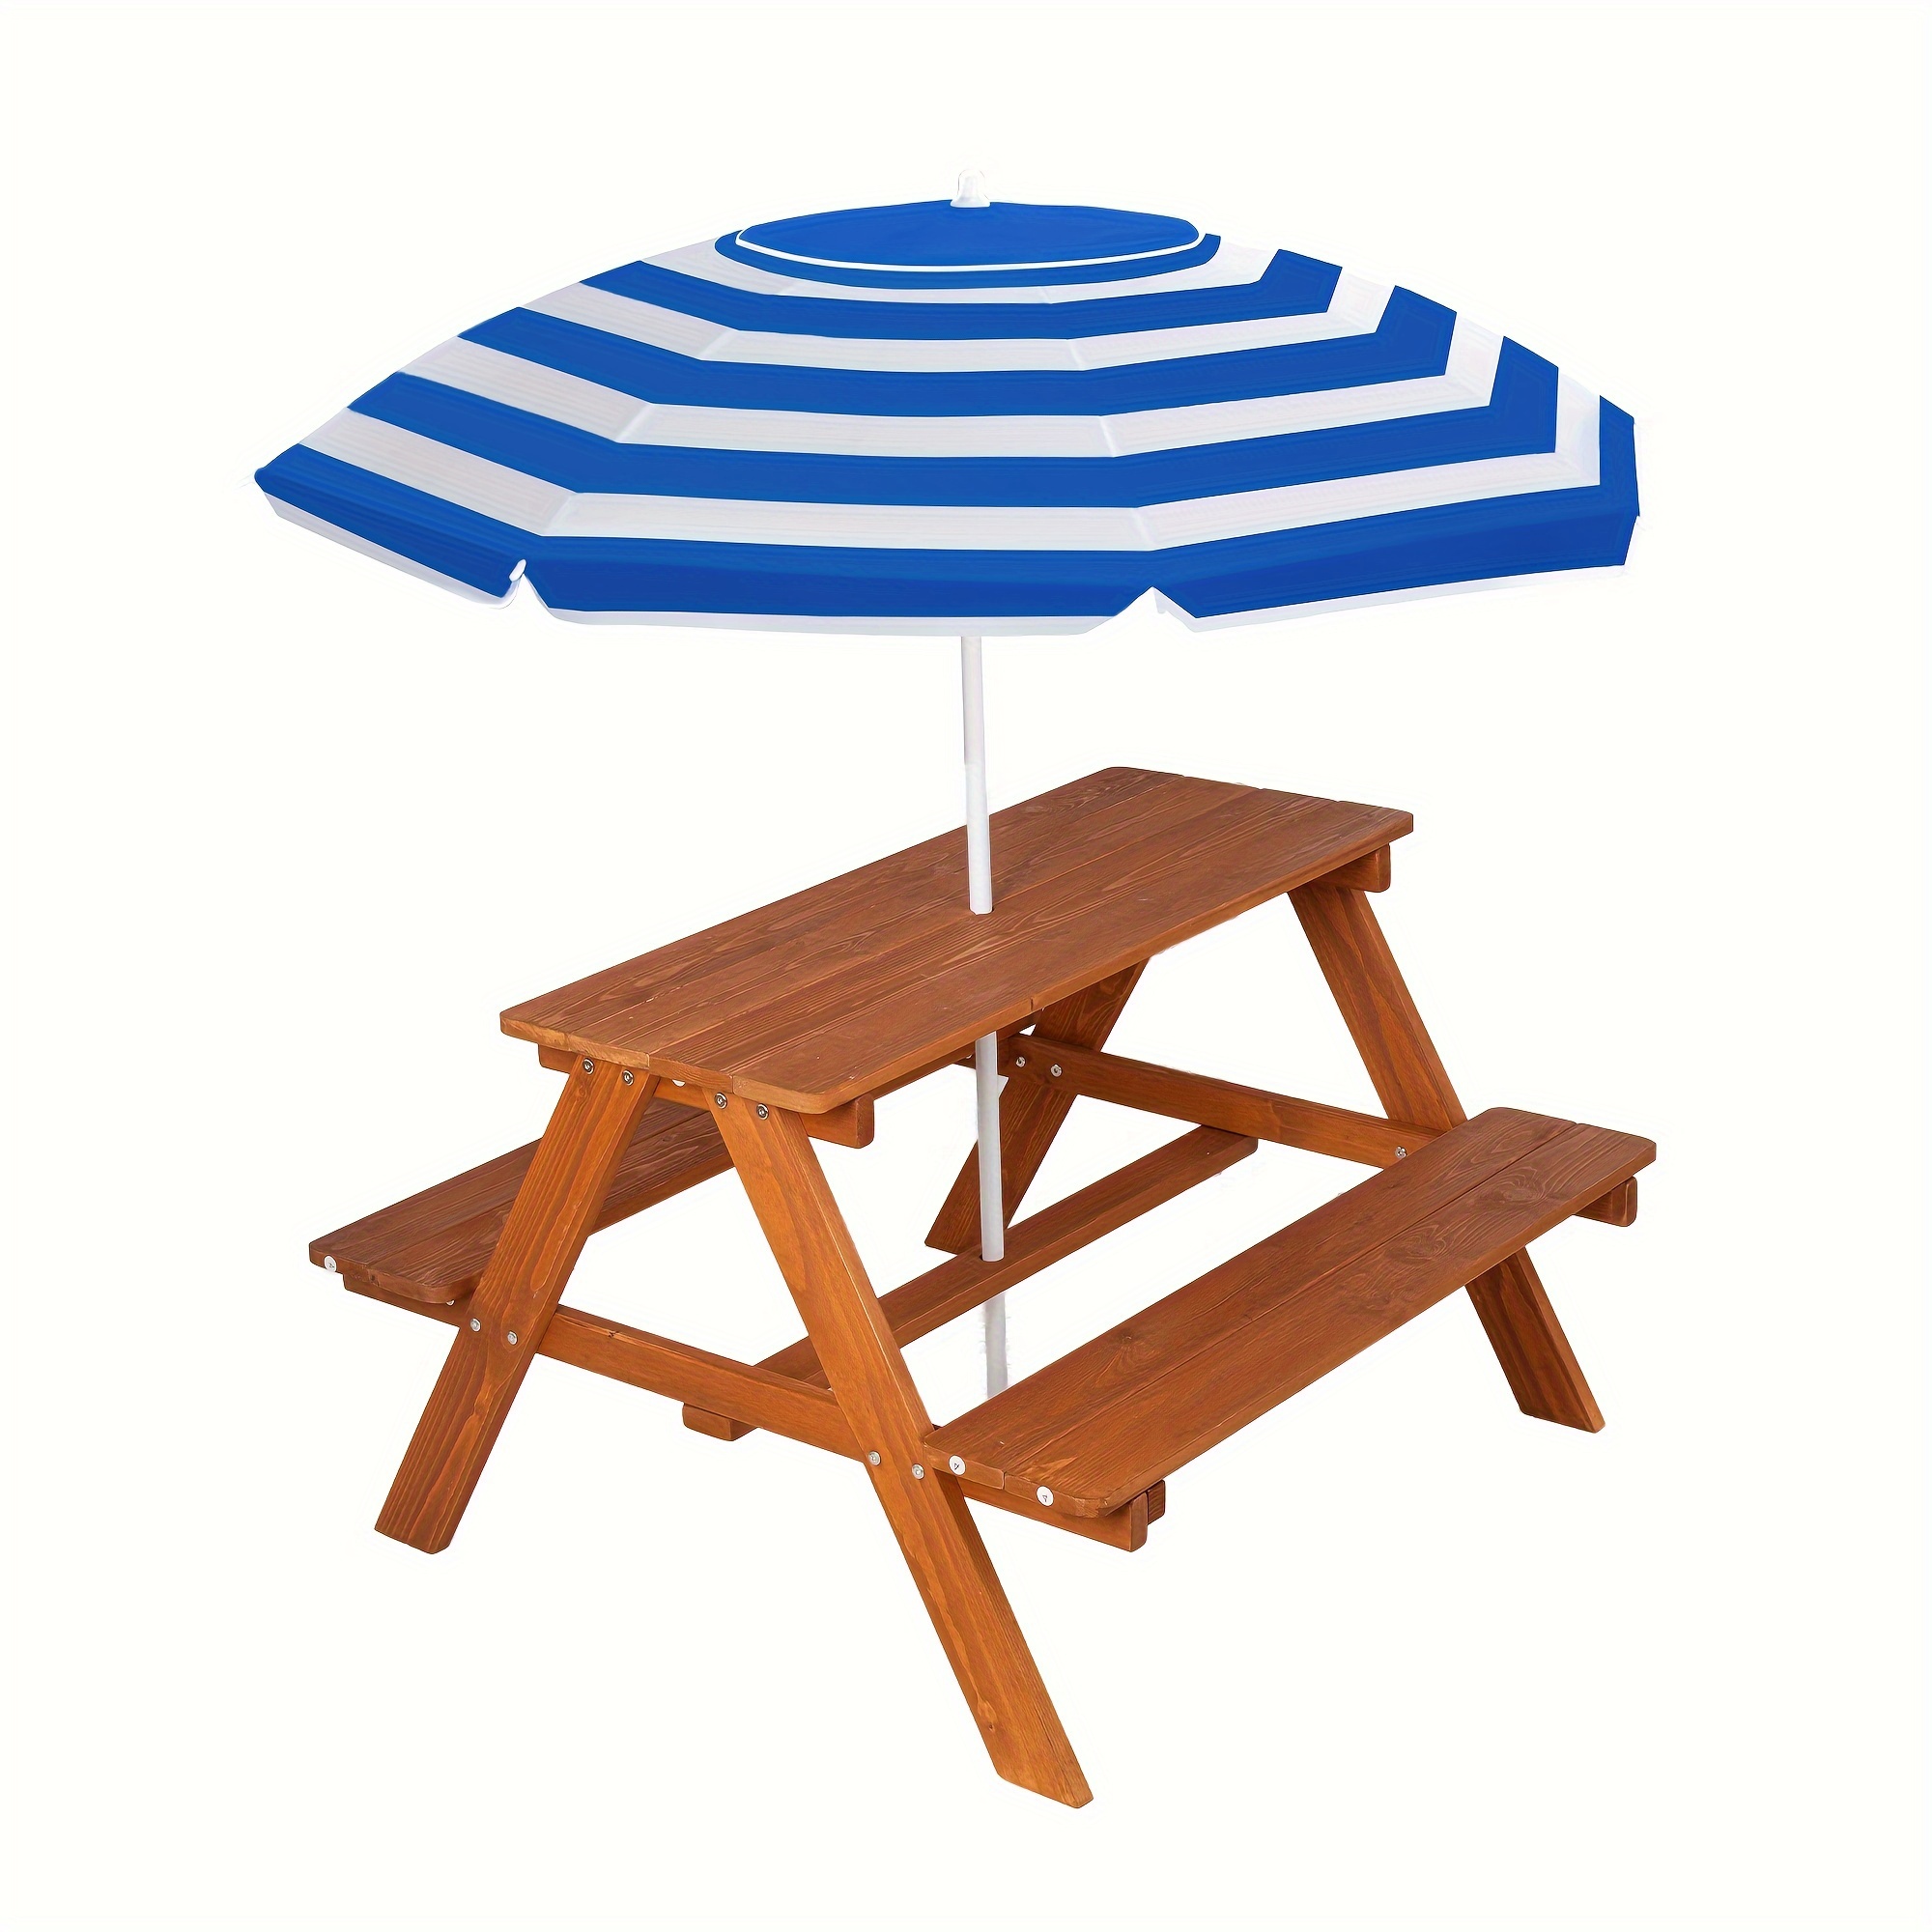 

Wooden Picnic Table With Adjustable Folding Umbrella, Picnic Outdoor Table, Built-in Seating, Outdoor Activities And Dining Table, Backyard Picnic Table, Blue